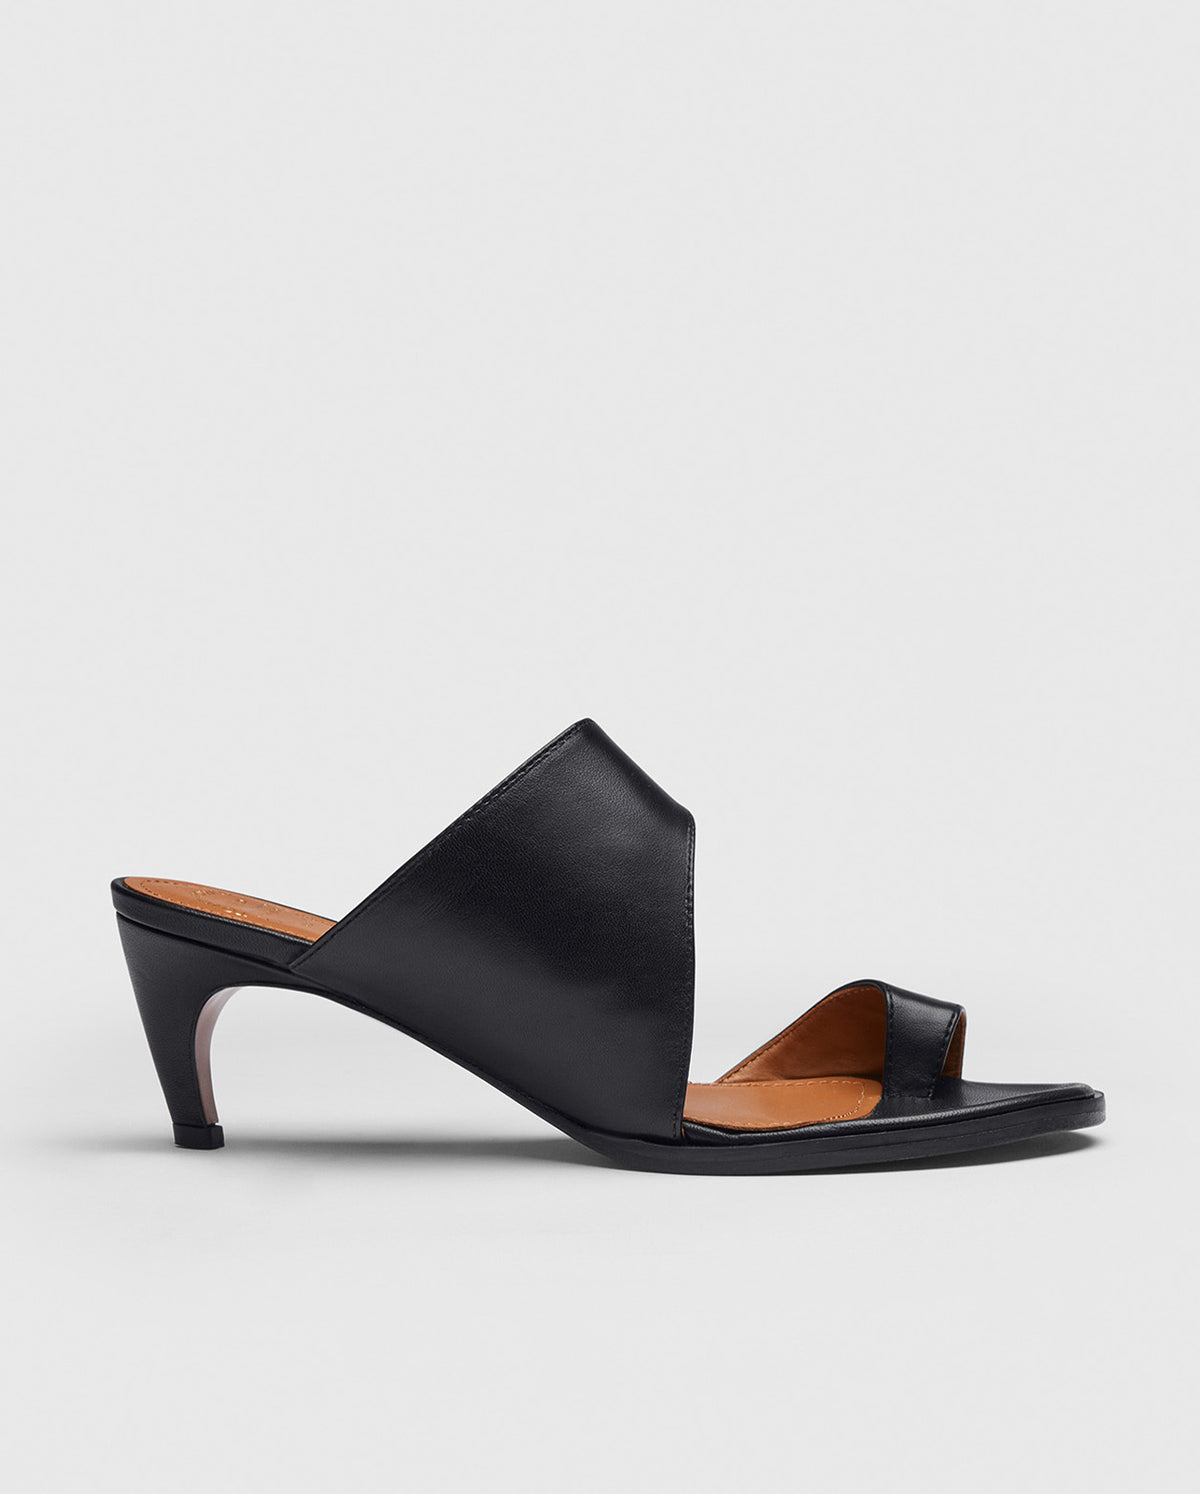 Trivento Black Leather Cut Out Heels